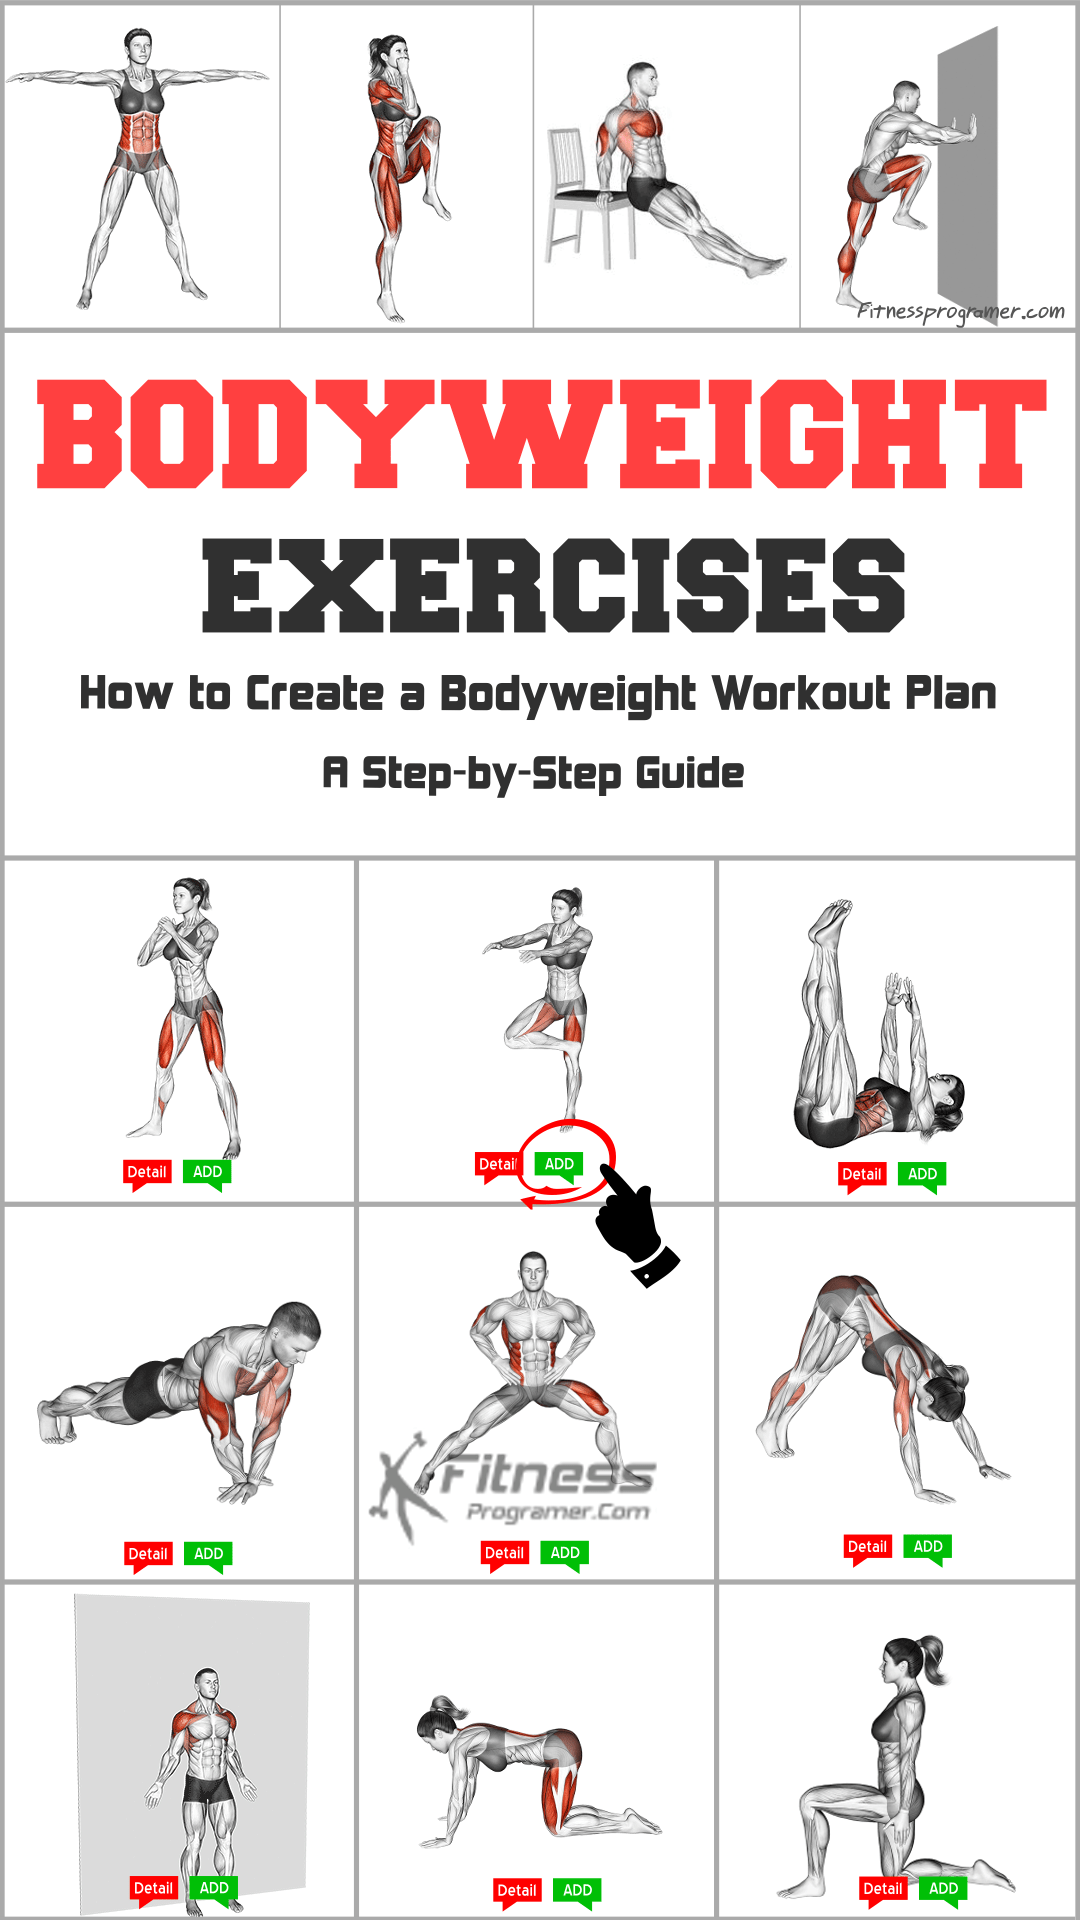 How To Create A Bodyweight Workout Plan: Step By Step Guide